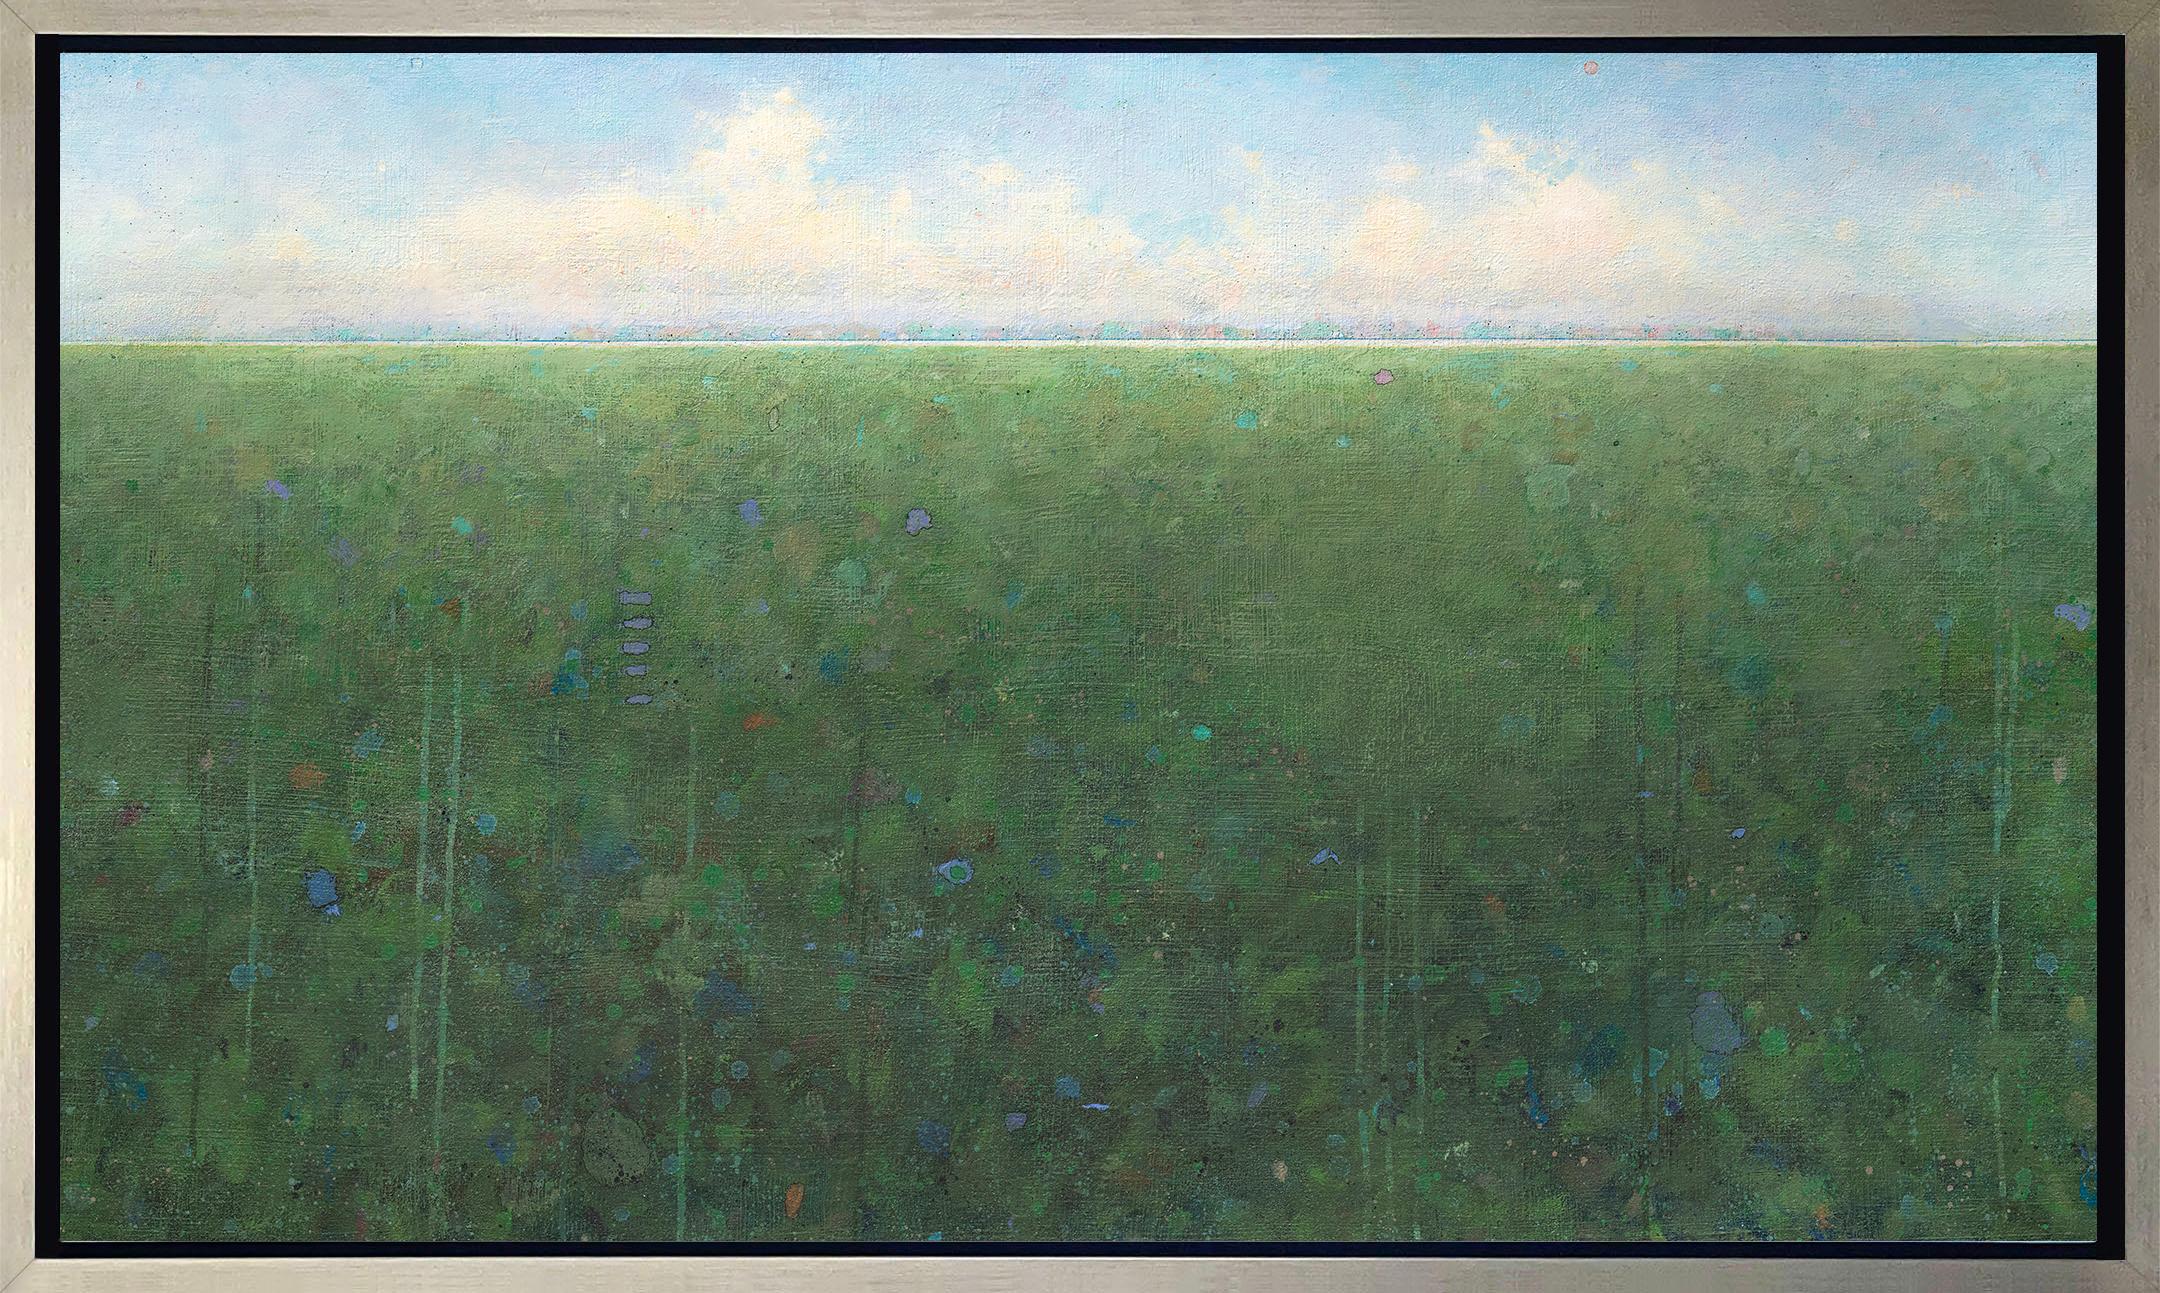 Elwood Howell Abstract Print - "Long View, " Framed Limited Edition Giclee Print, 18" x 30"